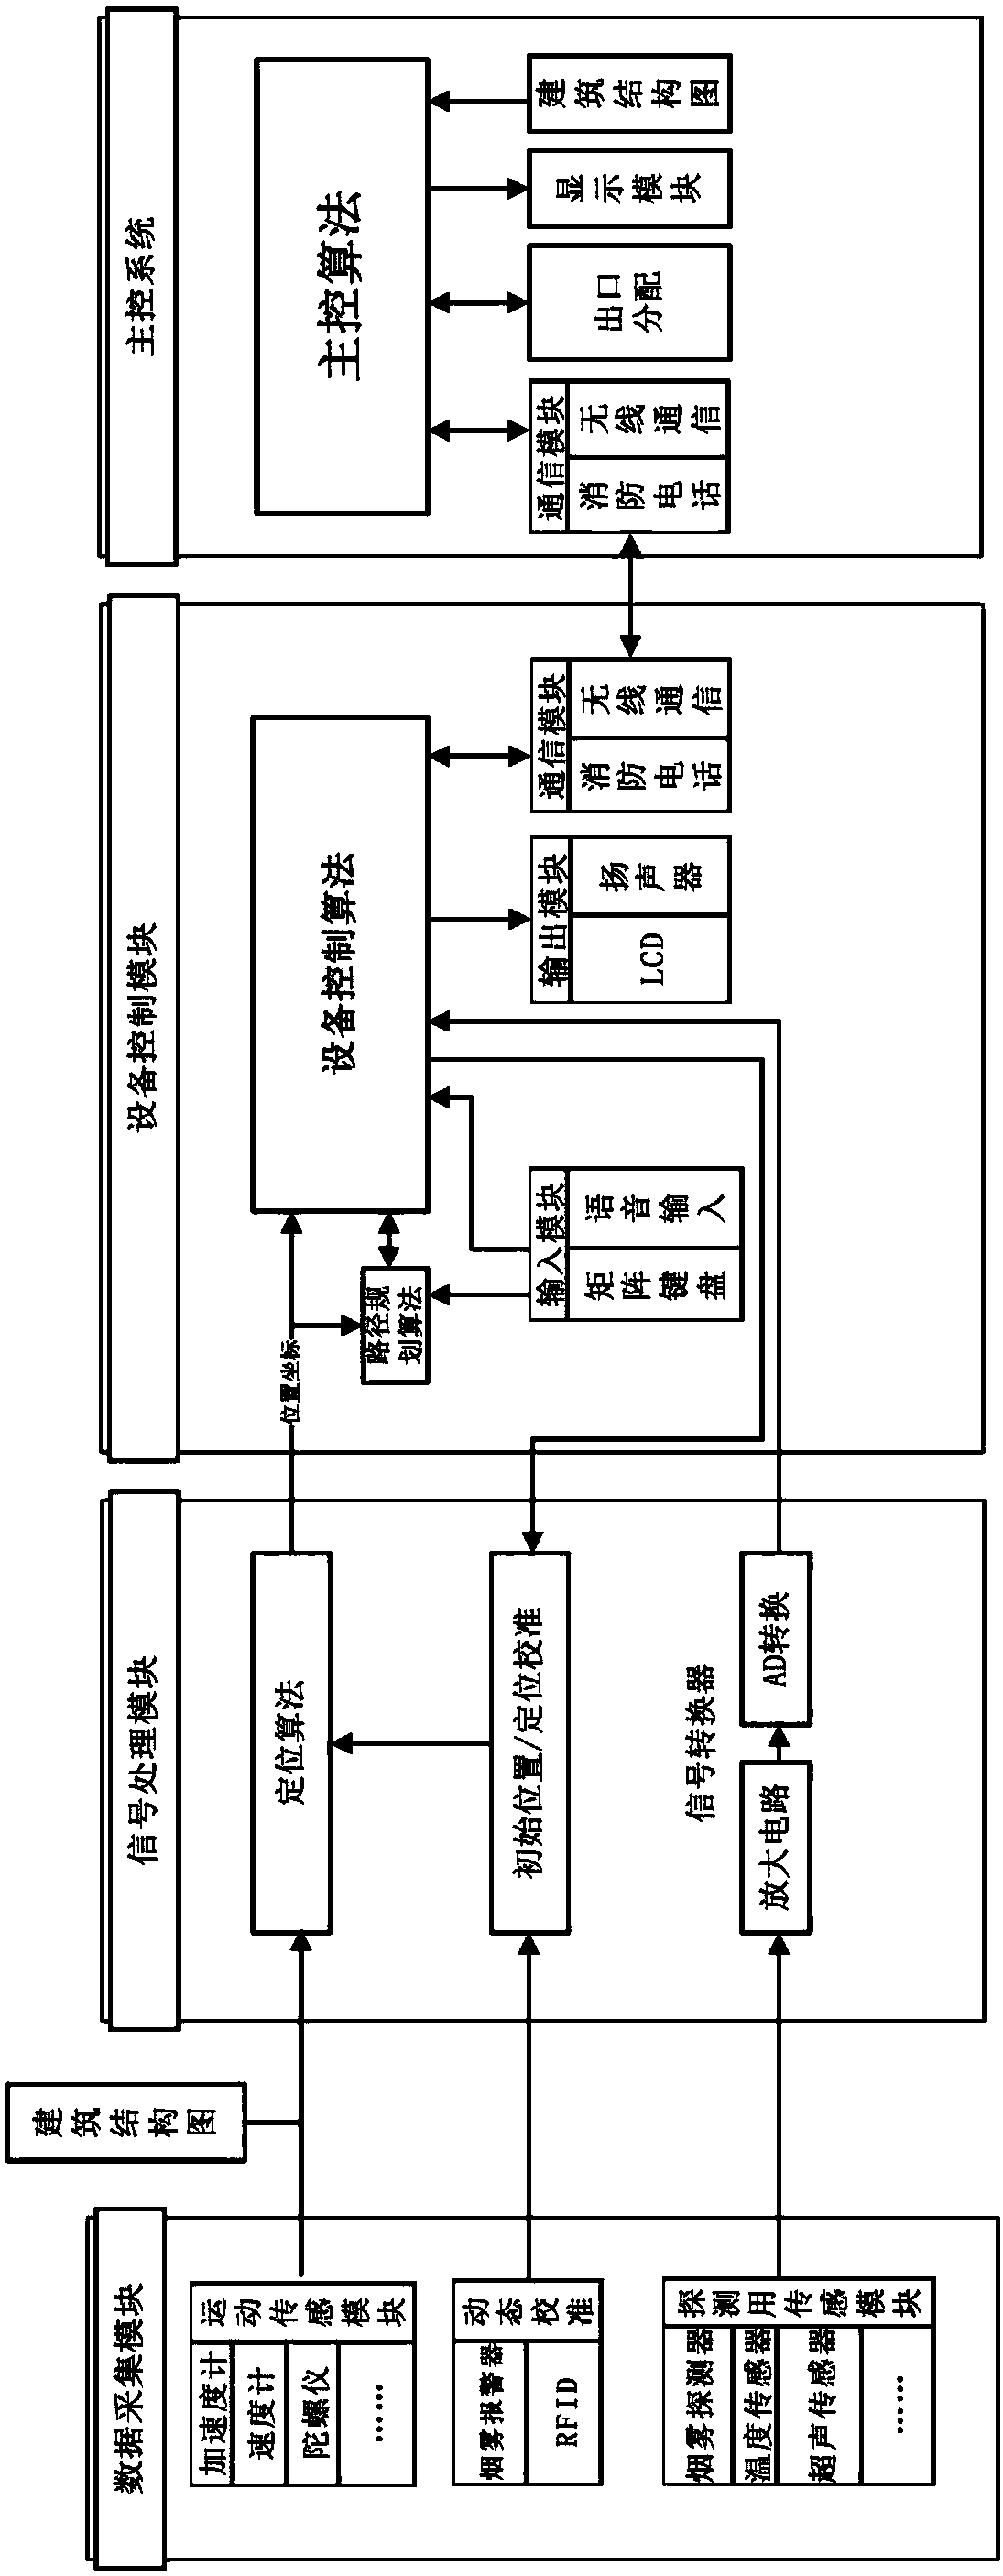 Escape indoor navigation system used for guests based on building structure chart and fire-fighting communication system